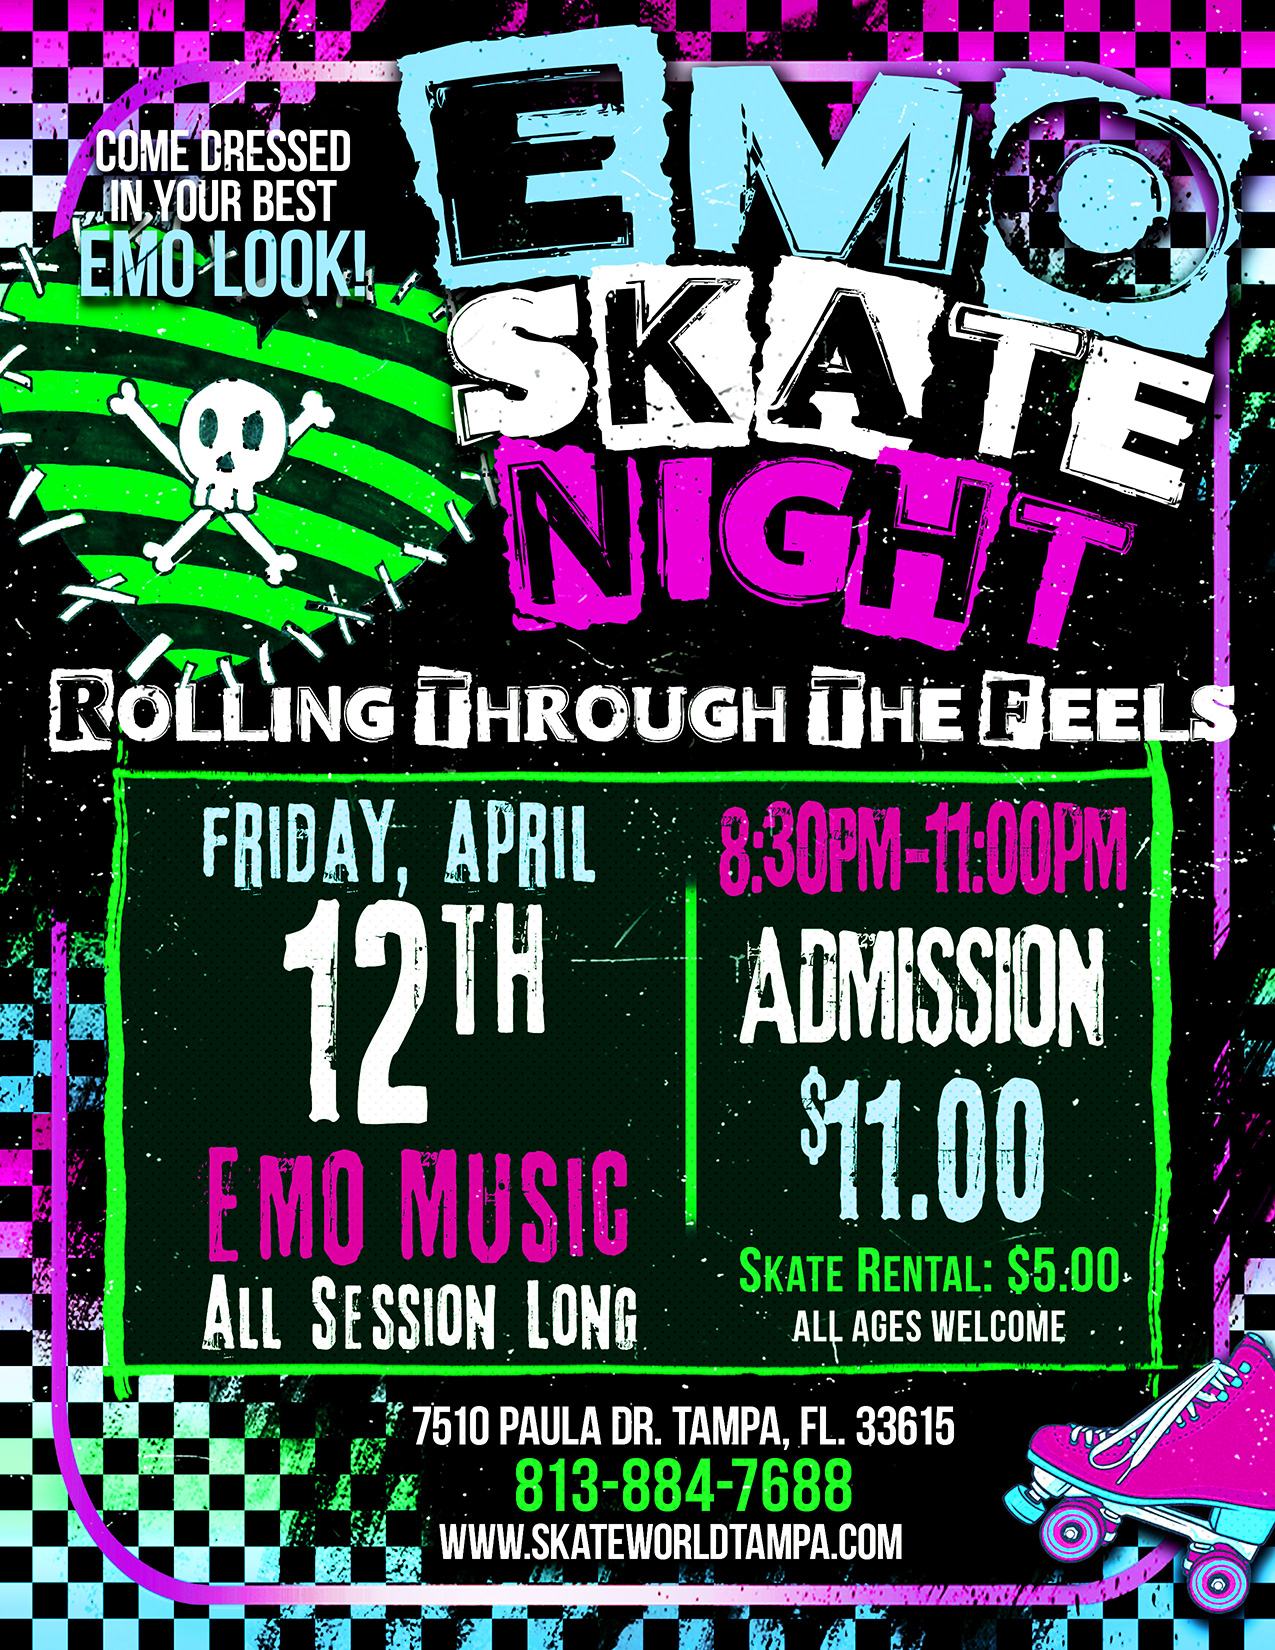 Emo Skate Night at Skateworld Tampa! All ages welcome!